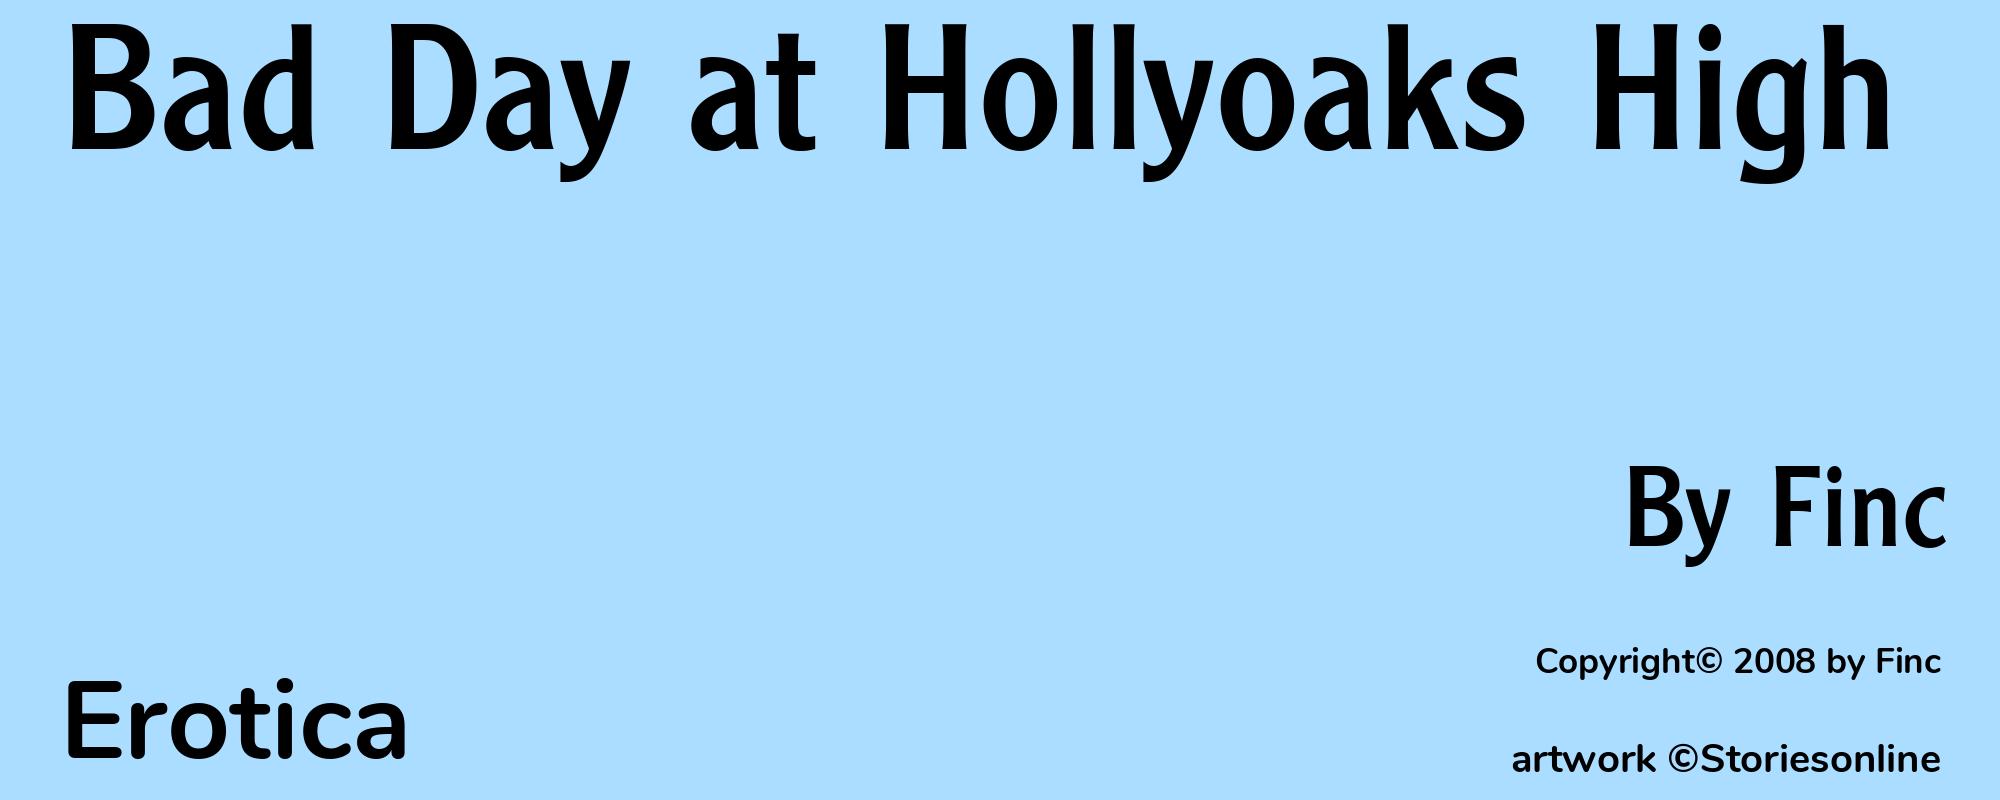 Bad Day at Hollyoaks High - Cover